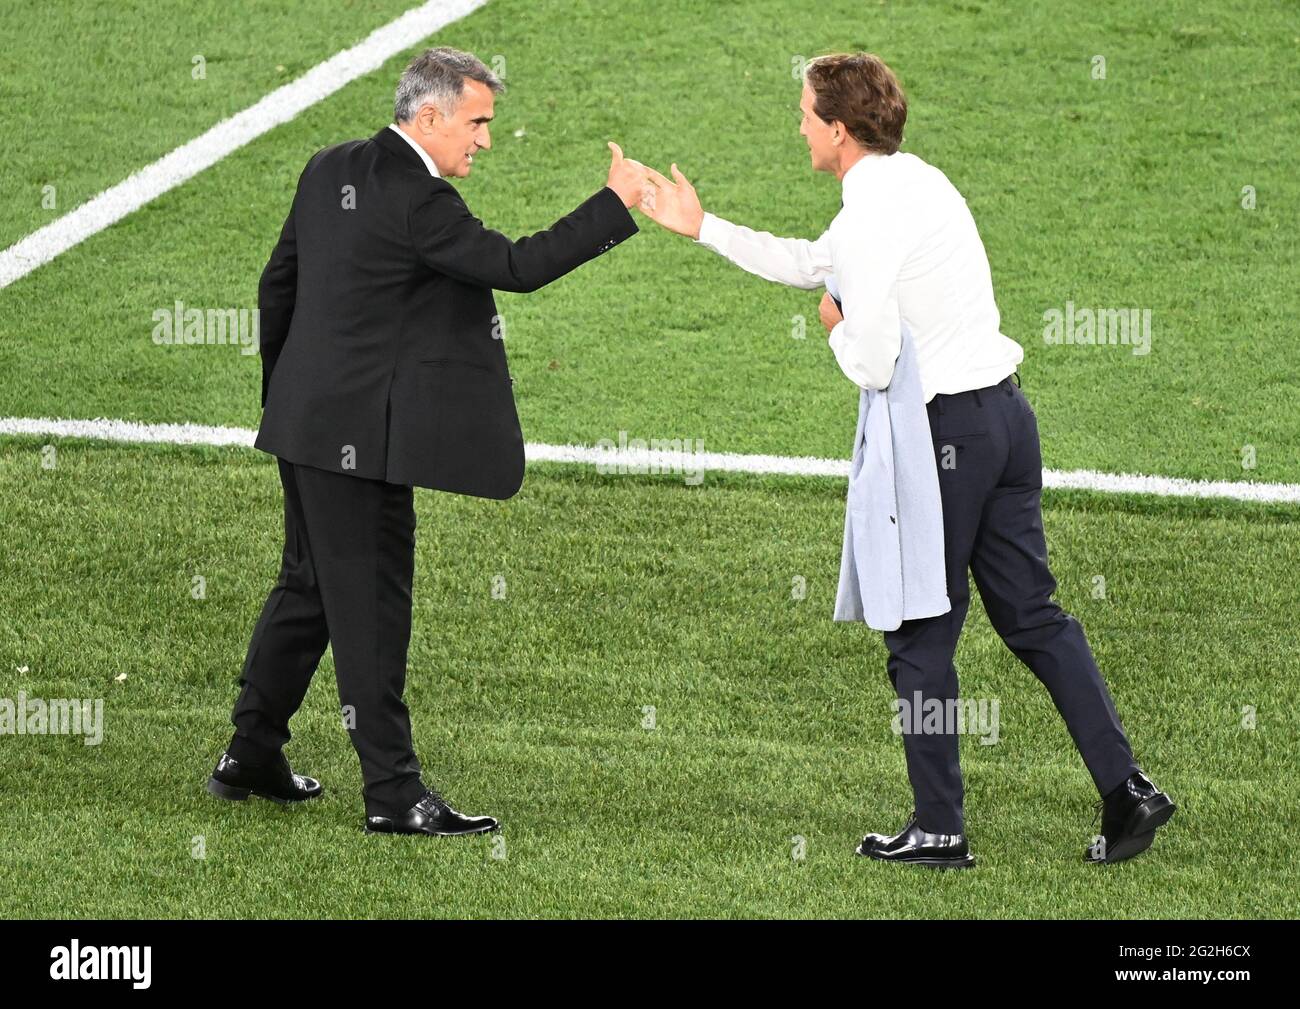 11 June 2021, Lazio, Rom: Football: European Championship, preliminary round, Group A, Turkey - Italy at the Stadio Olimpico di Roma. Coach Senol Günes (l) of Turkey and coach Roberto Mancini of Italy say goodbye after the match. Important: For editorial news reporting purposes only. Not used for commercial or marketing purposes without prior written approval of UEFA. Images must appear as still images and must not emulate match action video footage. Stock Photo